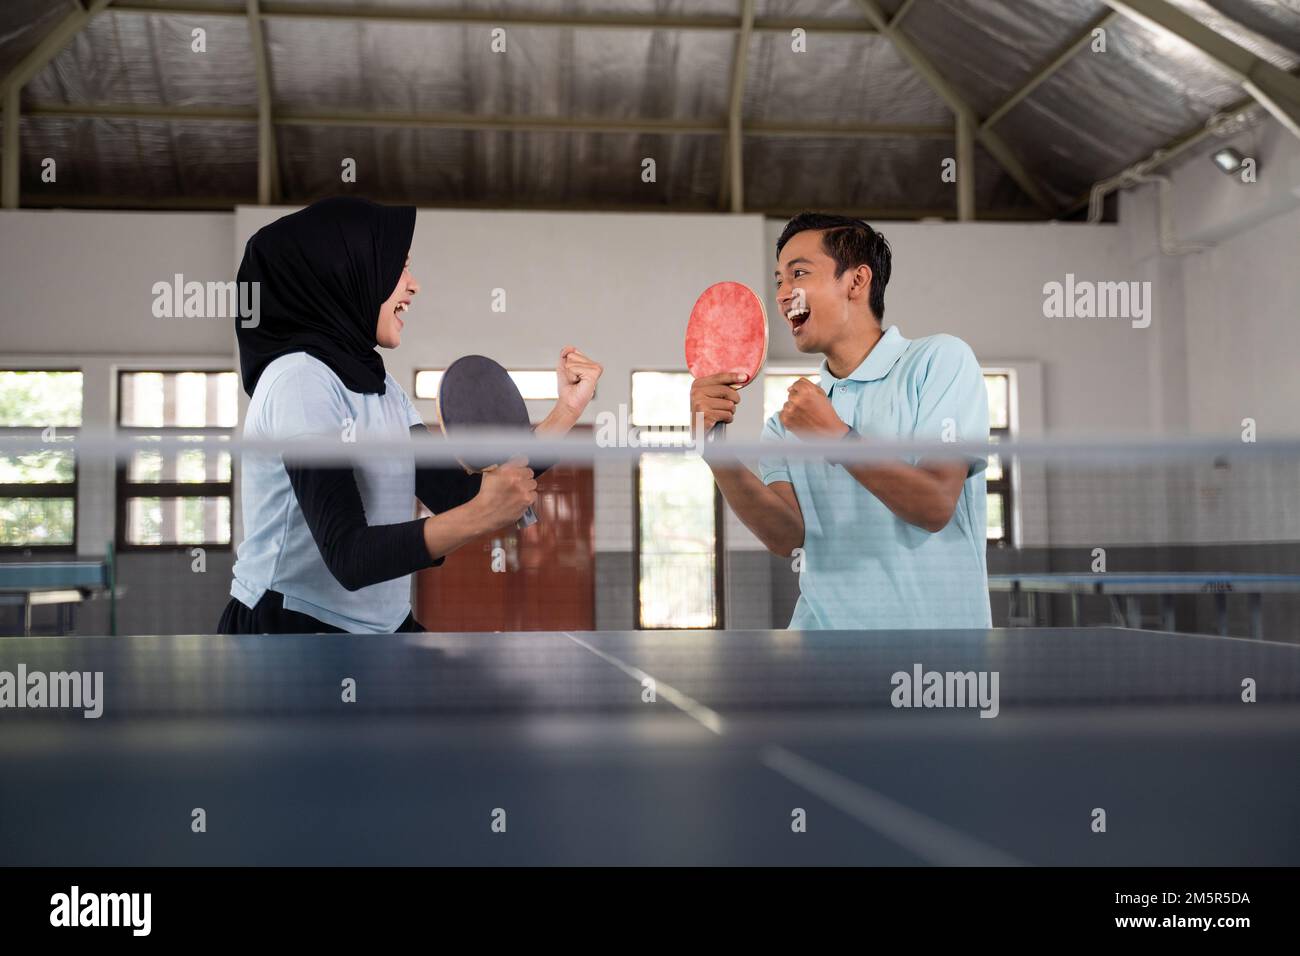 mixed doubles ping pong athlete excited to win Stock Photo